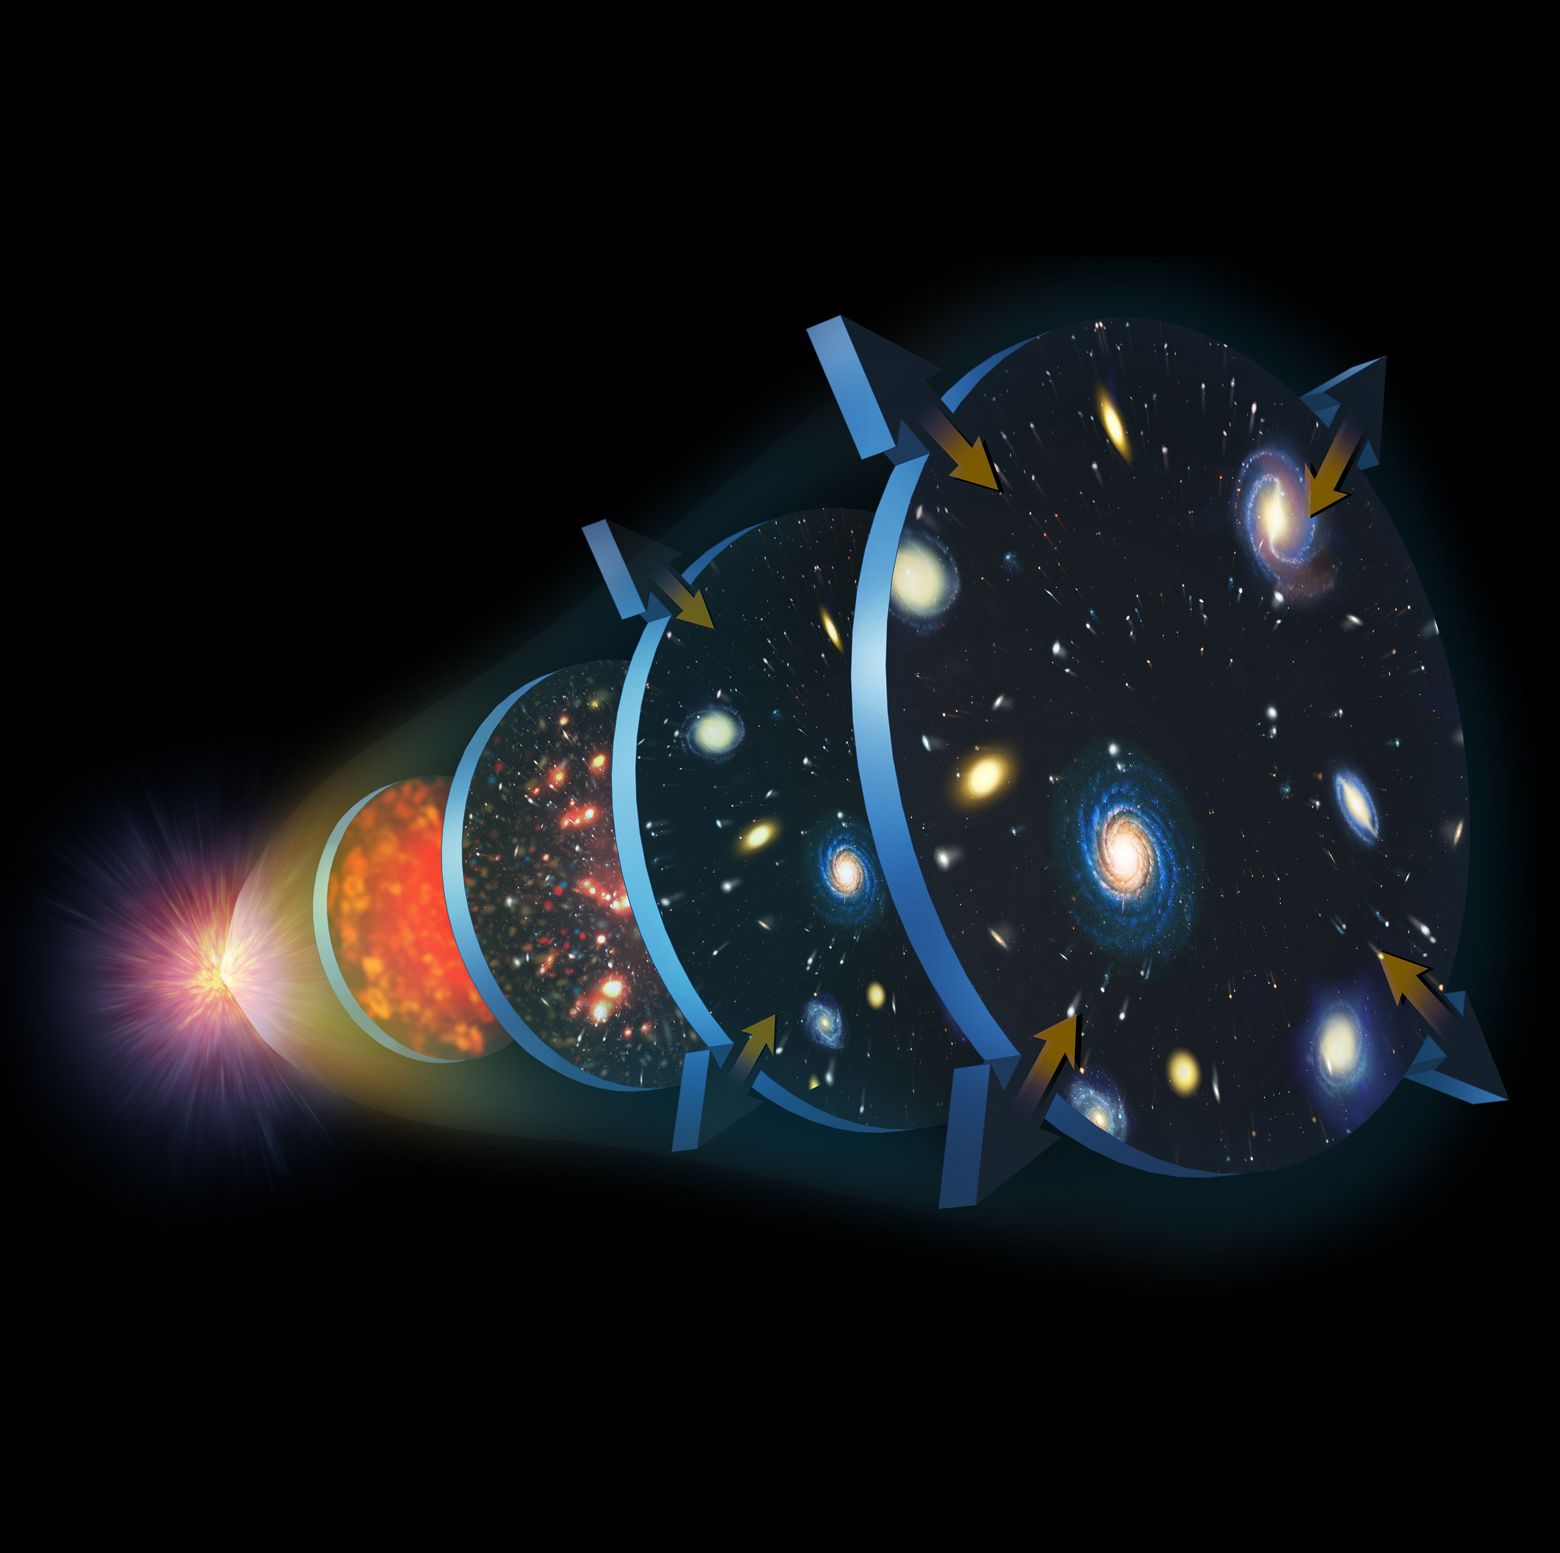 Our Entire Universe Was Once the Size of a Peach, According to the Big Bang Theory